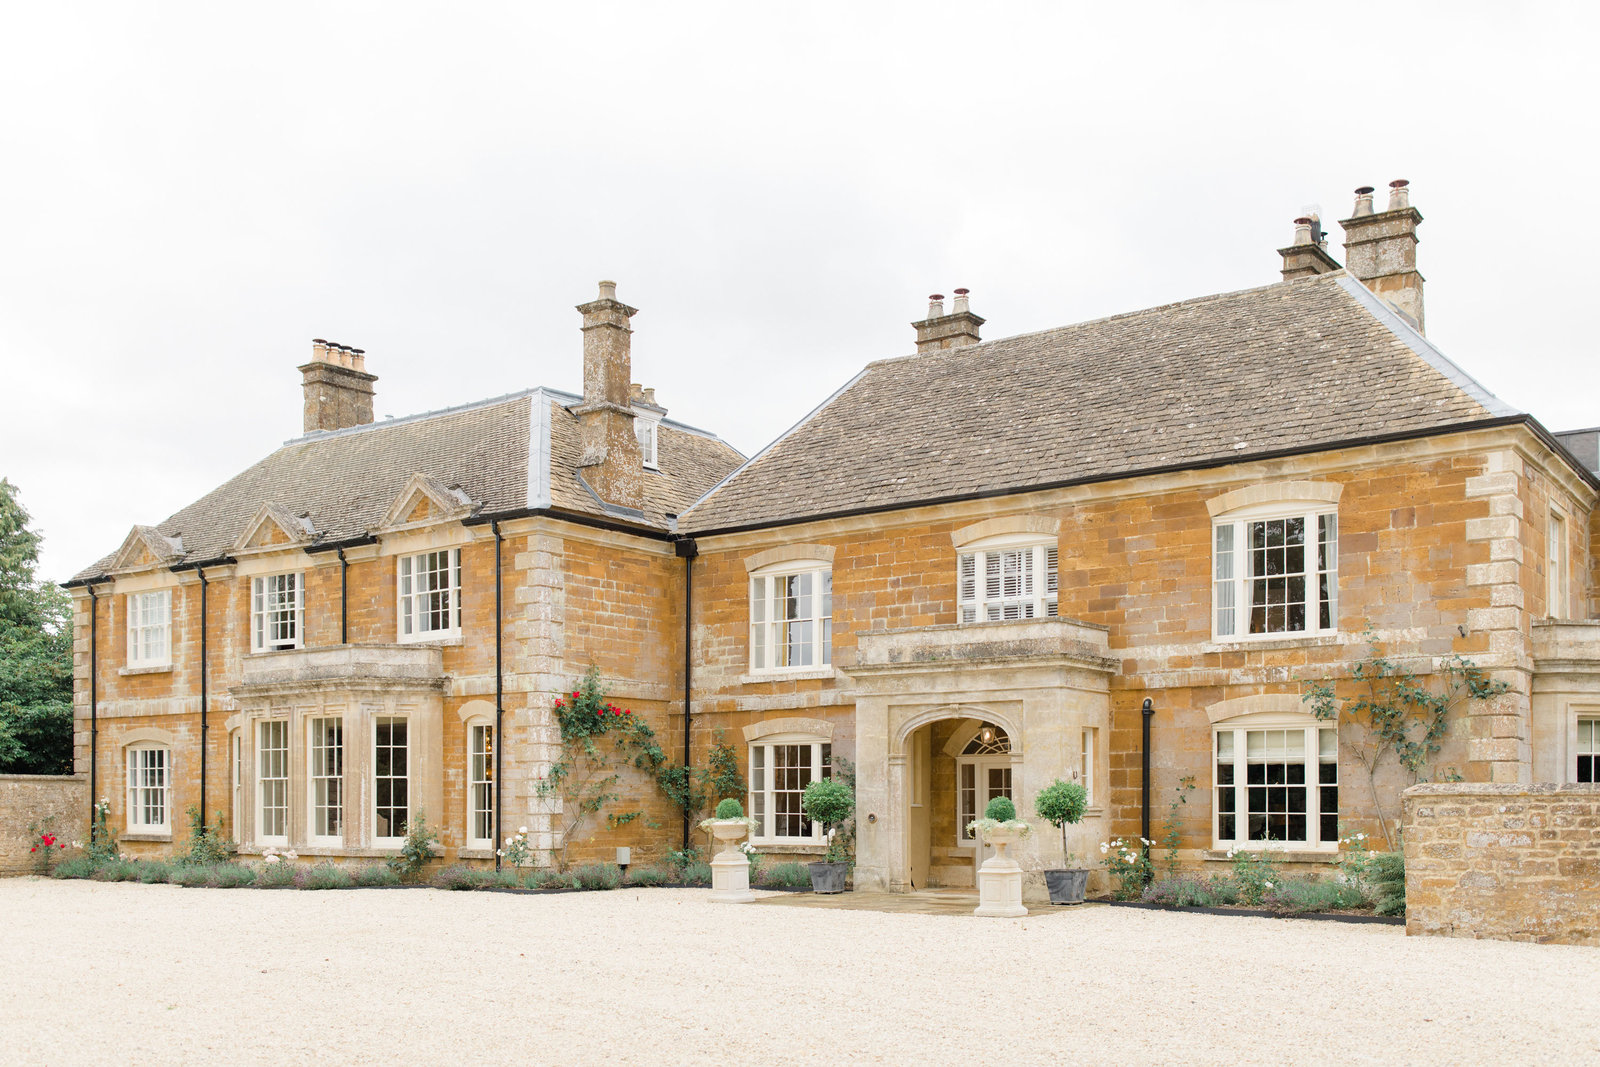 Entrance and driveway to Thorpe Manor, wedding venue in Oxfordshire